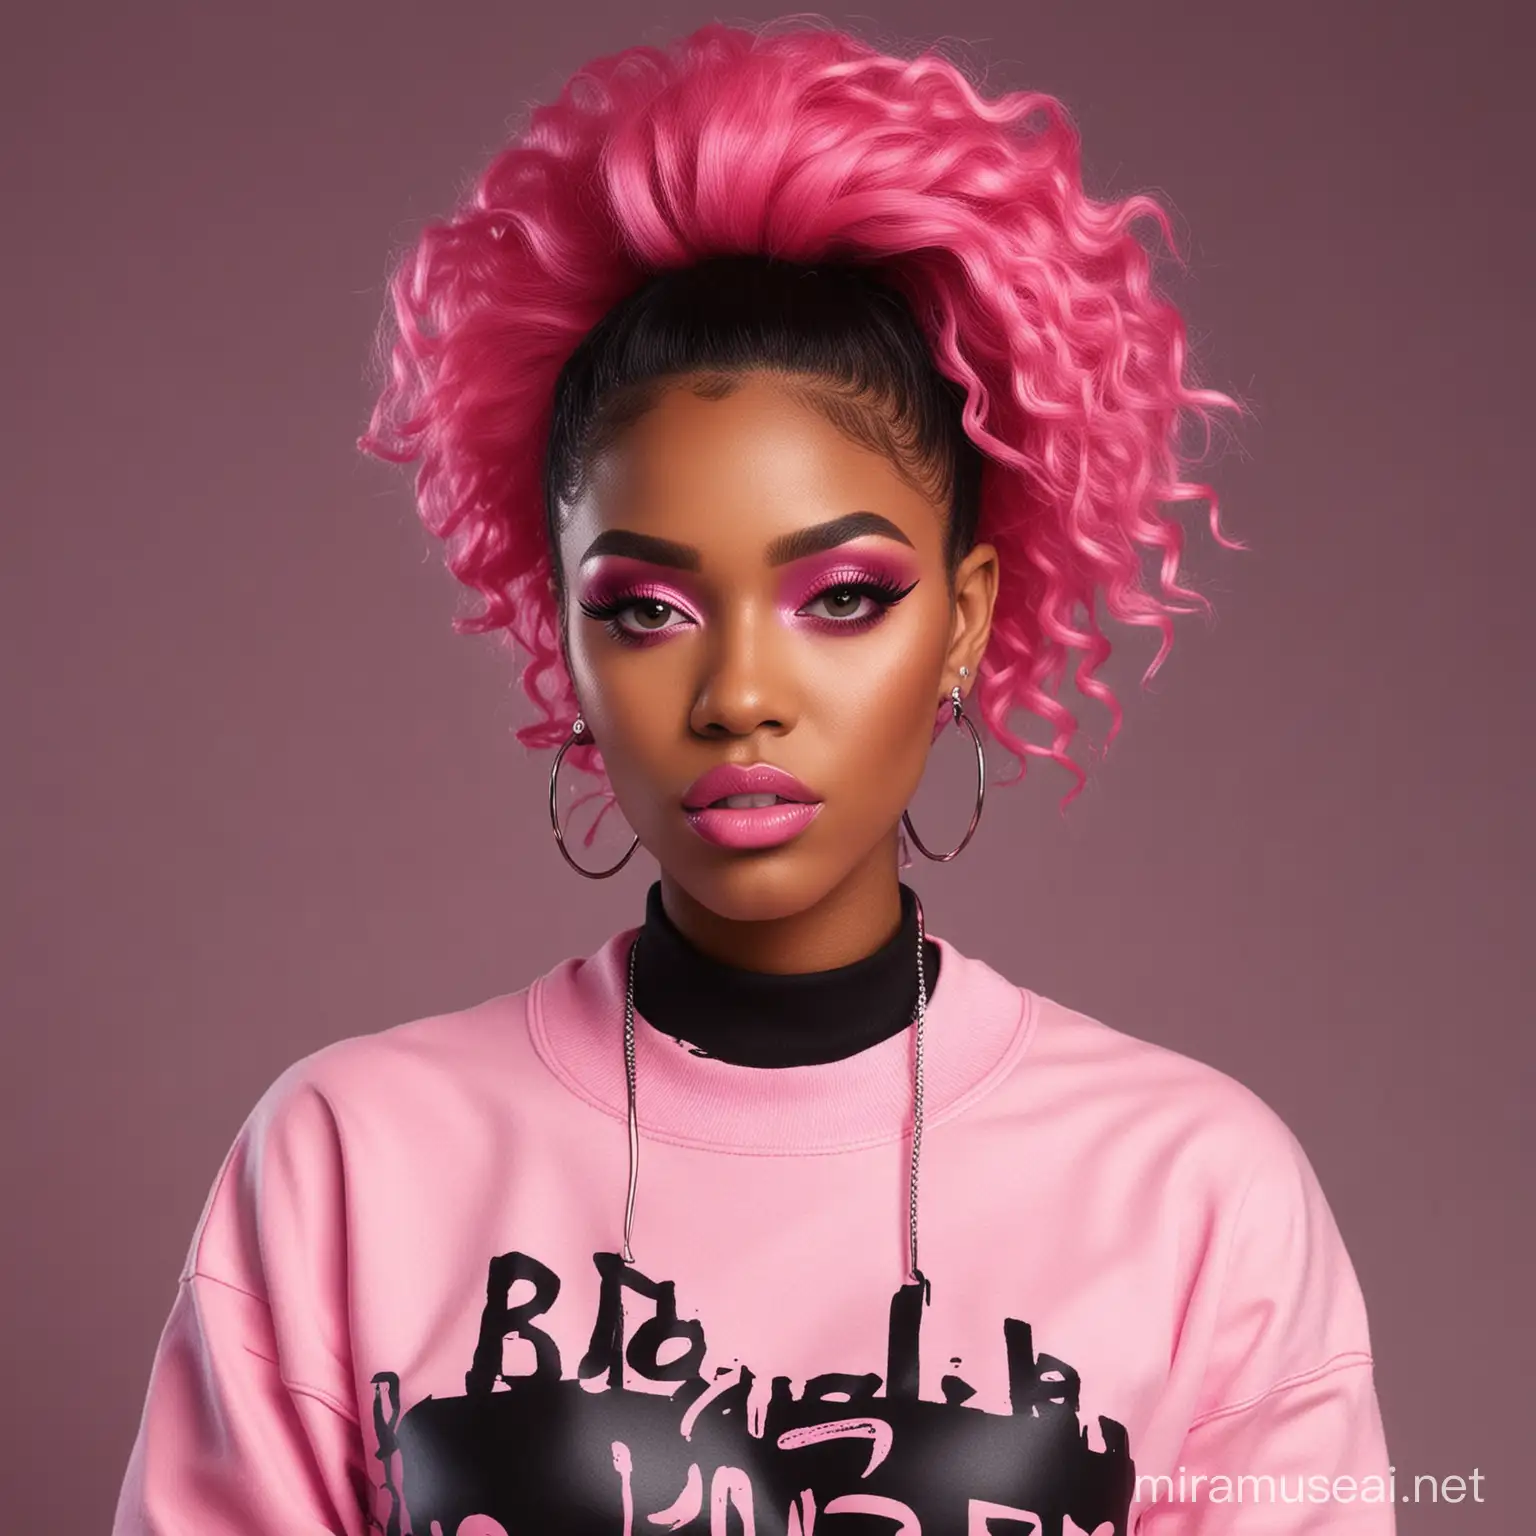 Stylish Black Woman with Pink Aesthetic